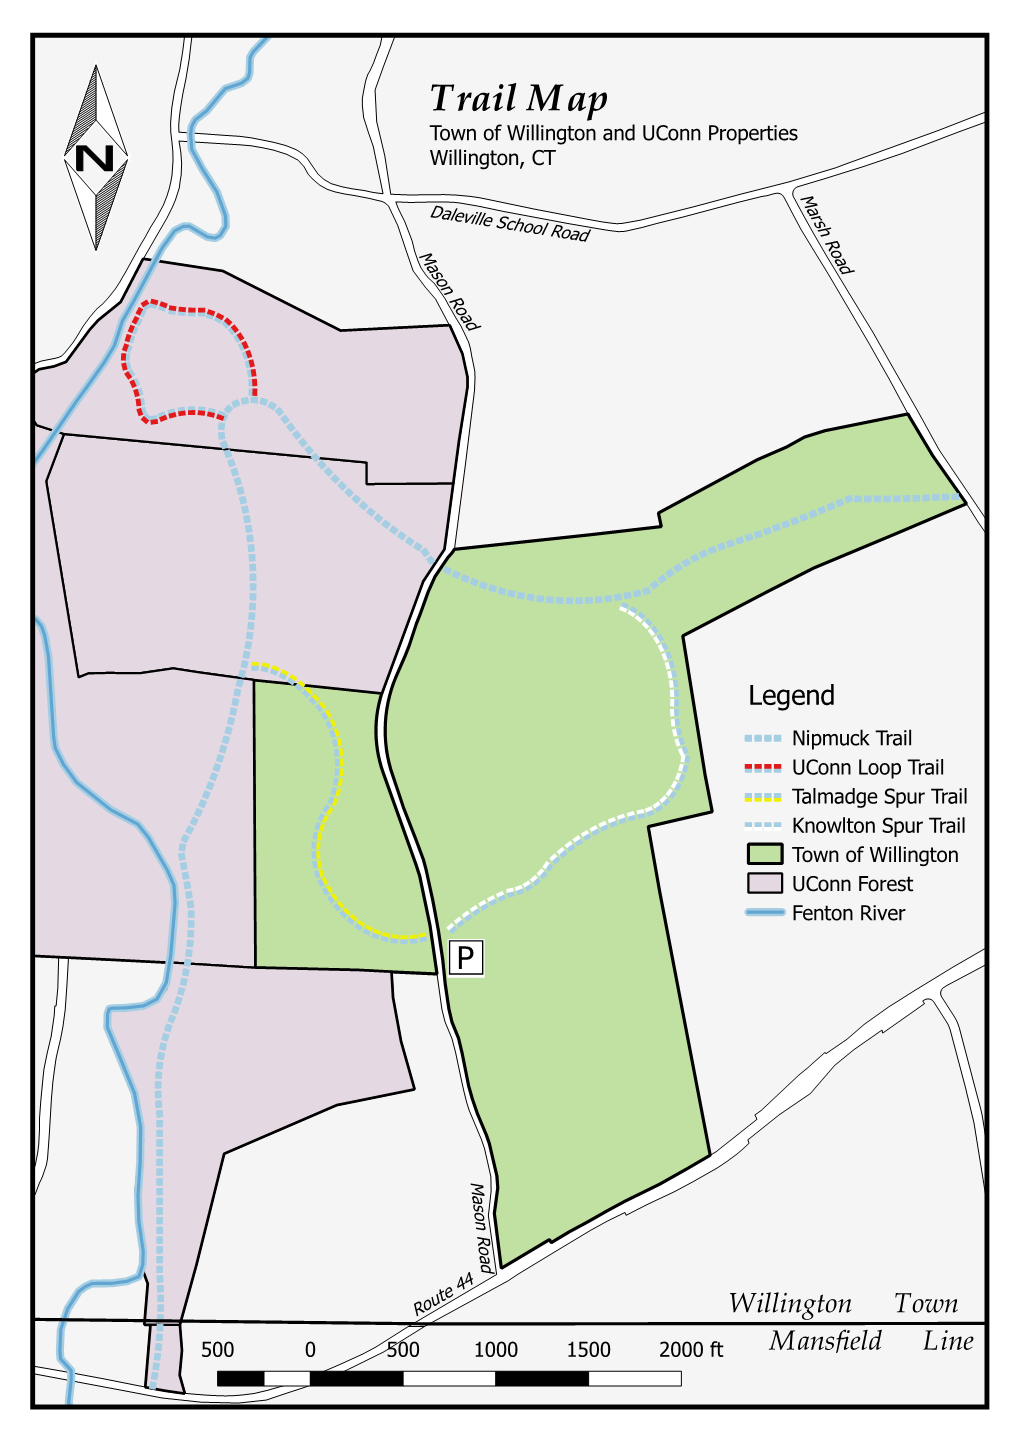 Trails on the Knowlton Preserve and Talmadge Tract